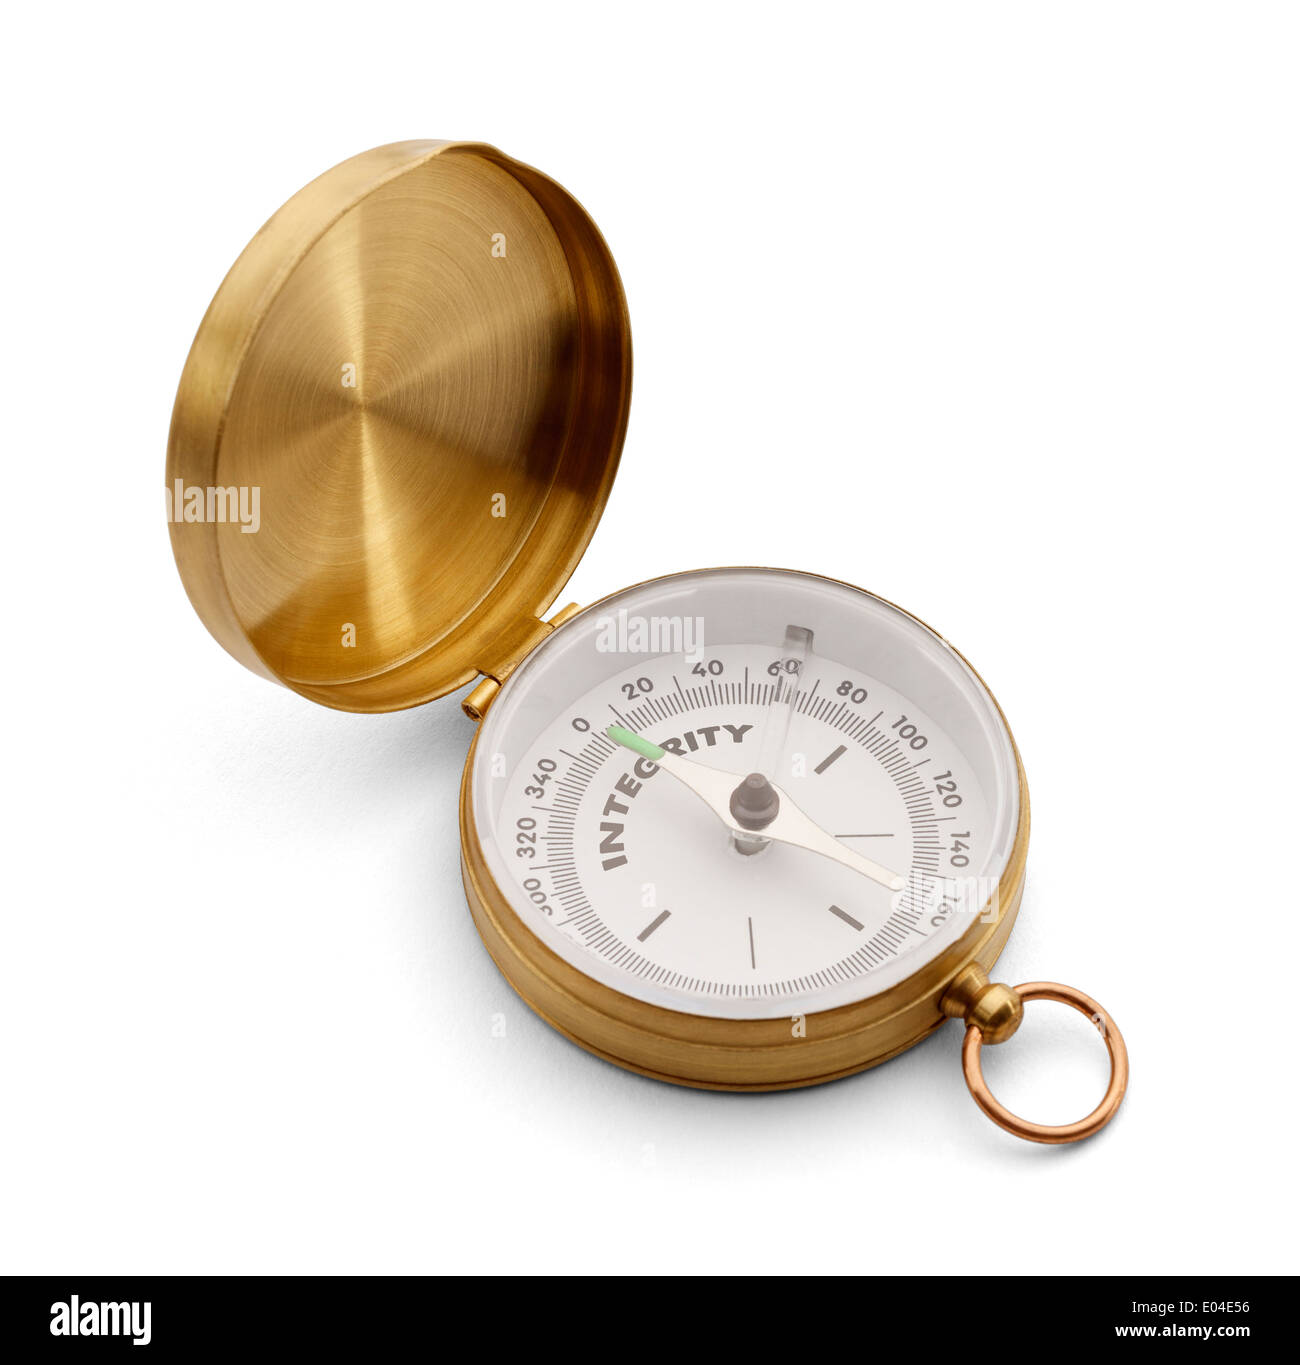 Brass Compass with Flip Top that has the Word Integrity Printed on it. Isolated on White Background. Stock Photo